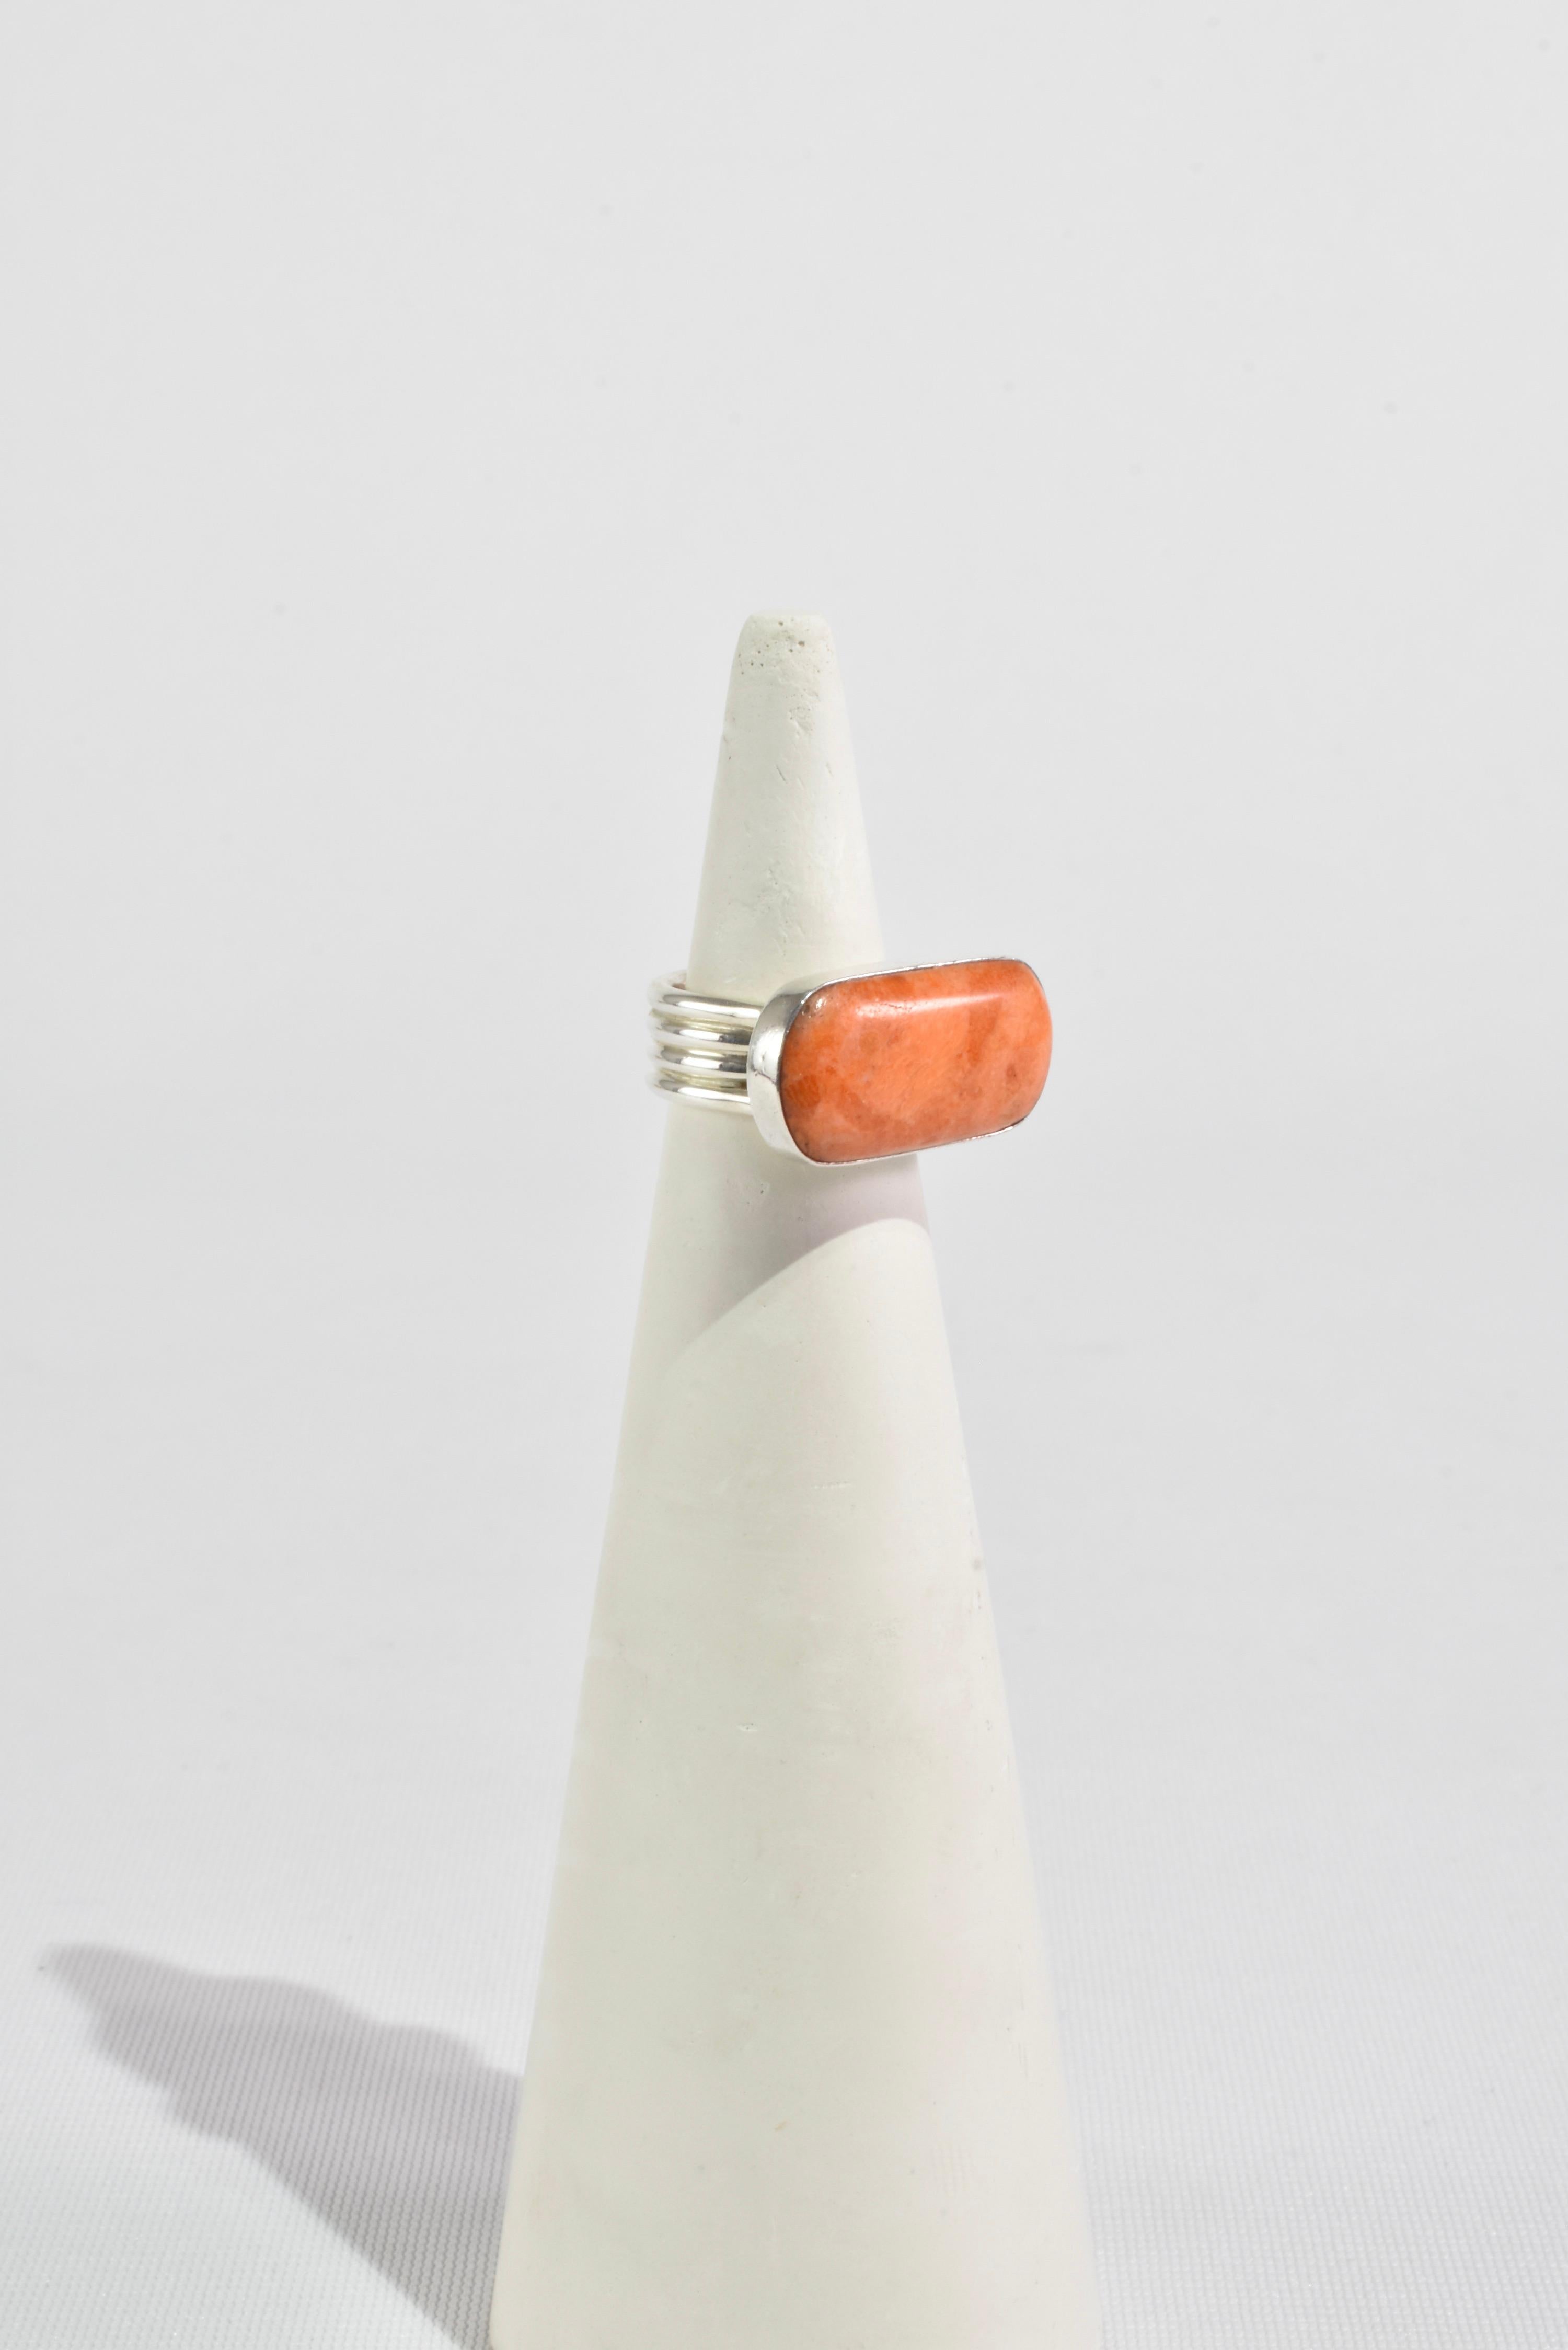 Stunning vintage ring with ribbed design and oversized coral detail. Stamped 925.

Material: Sterling silver, coral.